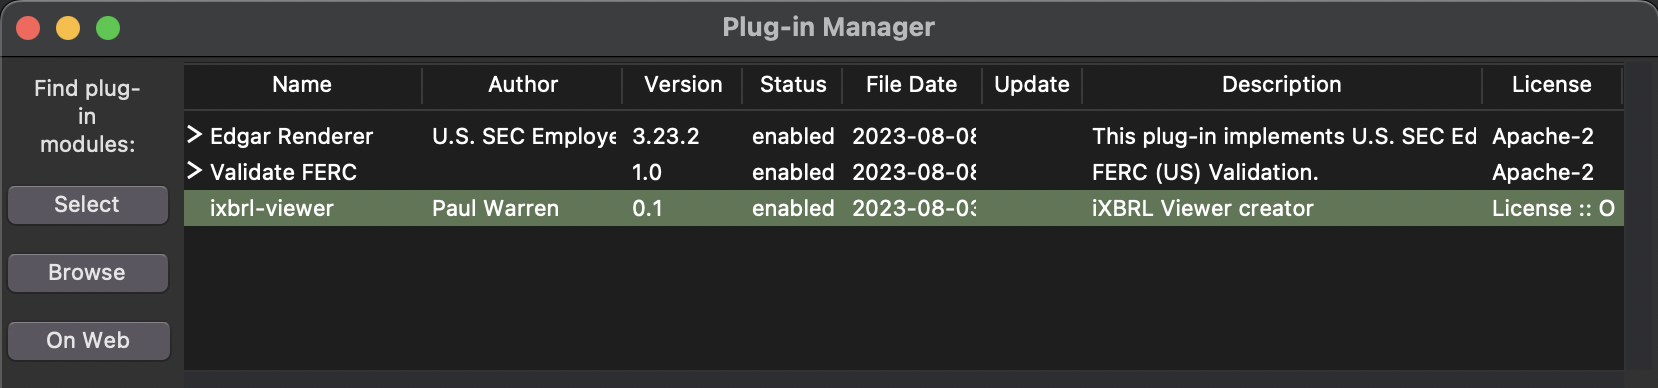 ../_images/gui_plugin_manager.png